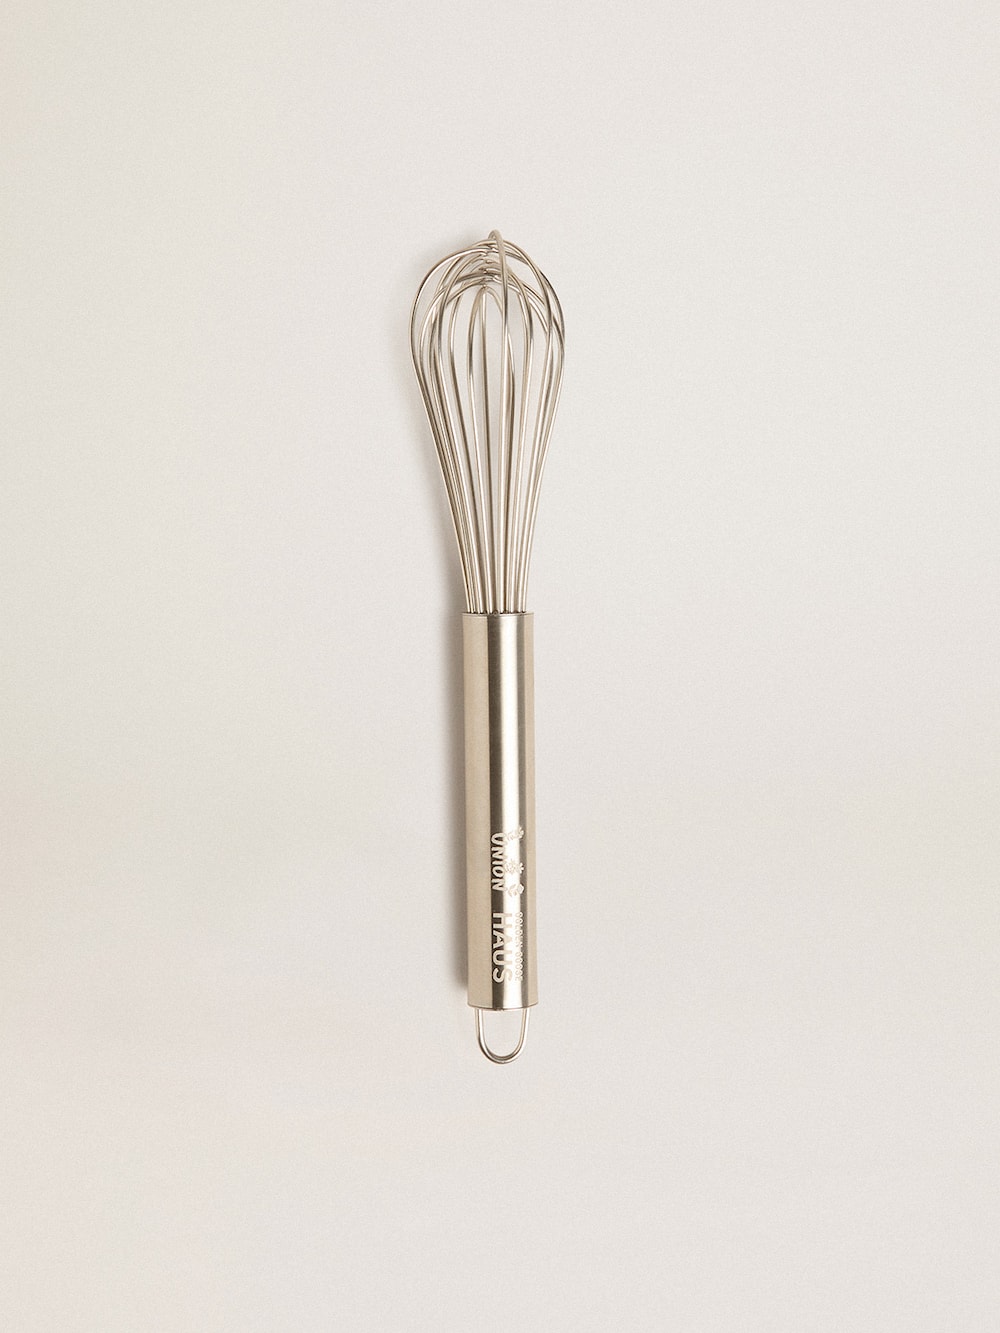 Golden Goose - Baker’s whisk Dreamed By Union Boulangerie HAUS of Dreamers exclusive in 